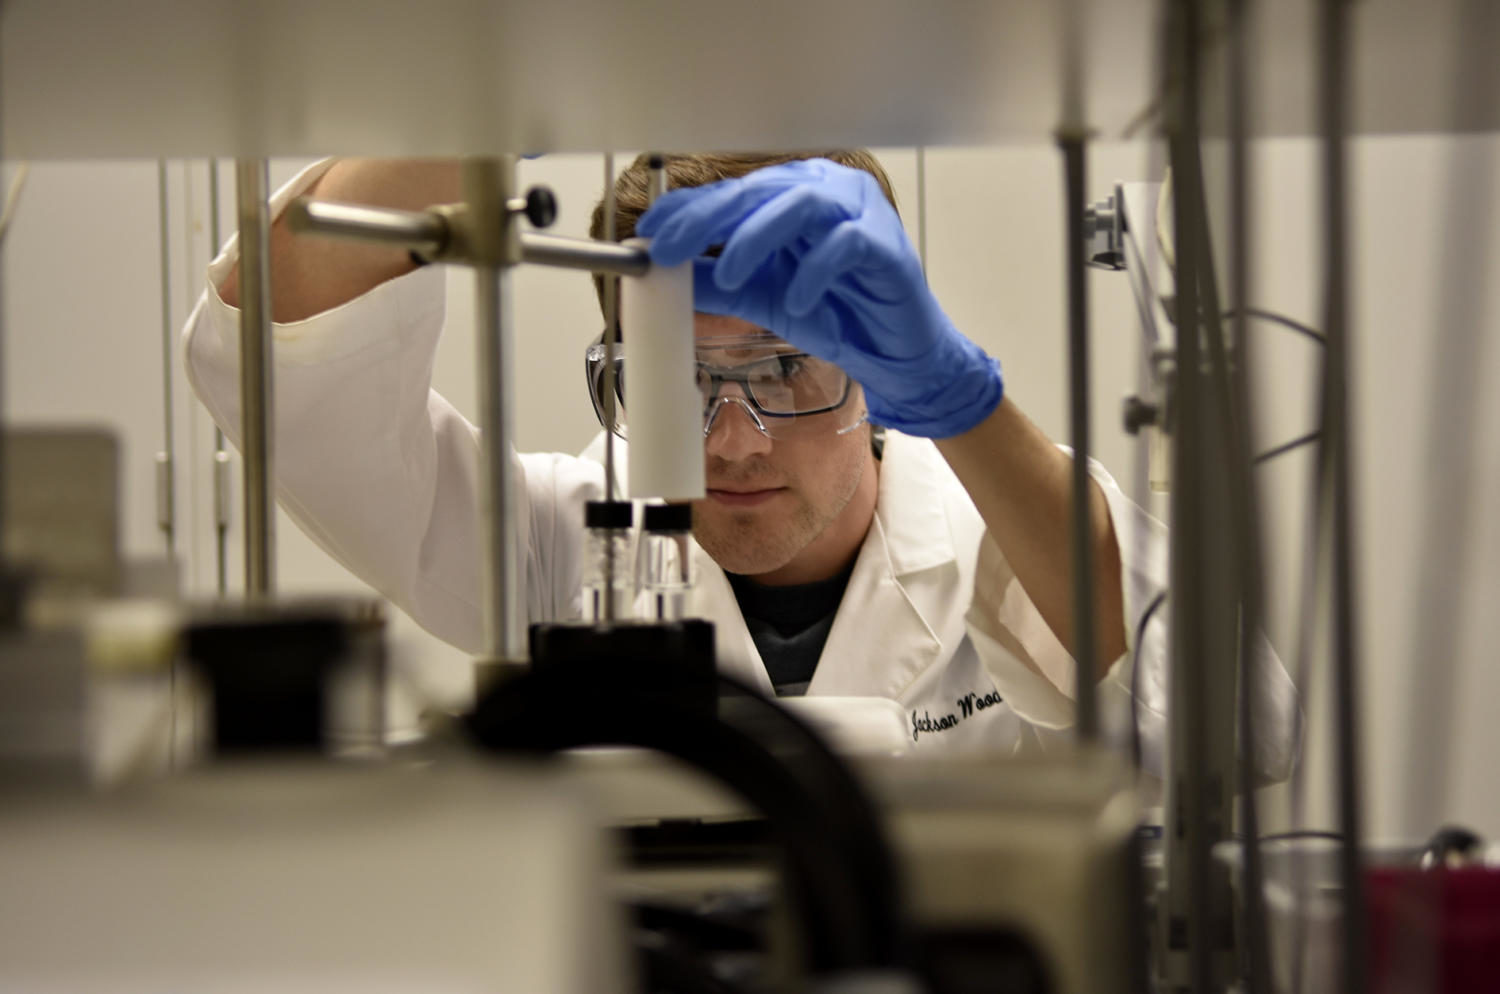 Jackson Wood, a junior from Apex studying biochemistry, places a sample on a stir plate Thursday, Sept. 14, 2017, in a science lab in Neckers. Wood inserts a fiber rod into the sample to extract data used in detailing the aroma of 40 Below Joe-brand coffee. The technique is called solid-phase micro-extraction, Wood said. We use the fiber to absorb volatile compounds off of the coffee and then analyze it. (Cory Ray | @coryray_DE)